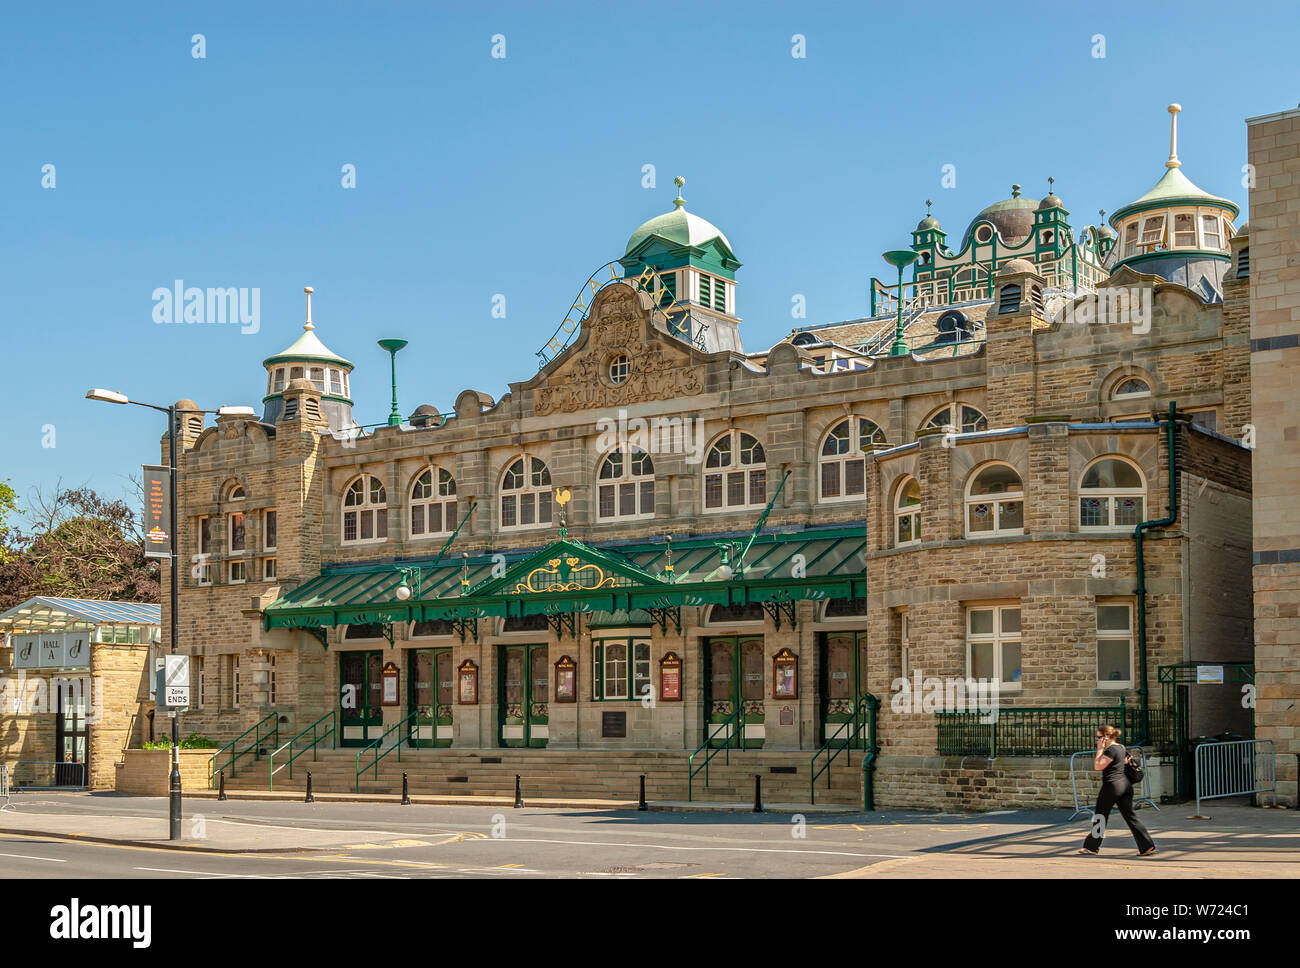 Royal Hall at the Valley Gardens in Harrogate a spa town in North Yorkshire, England Stock Photo